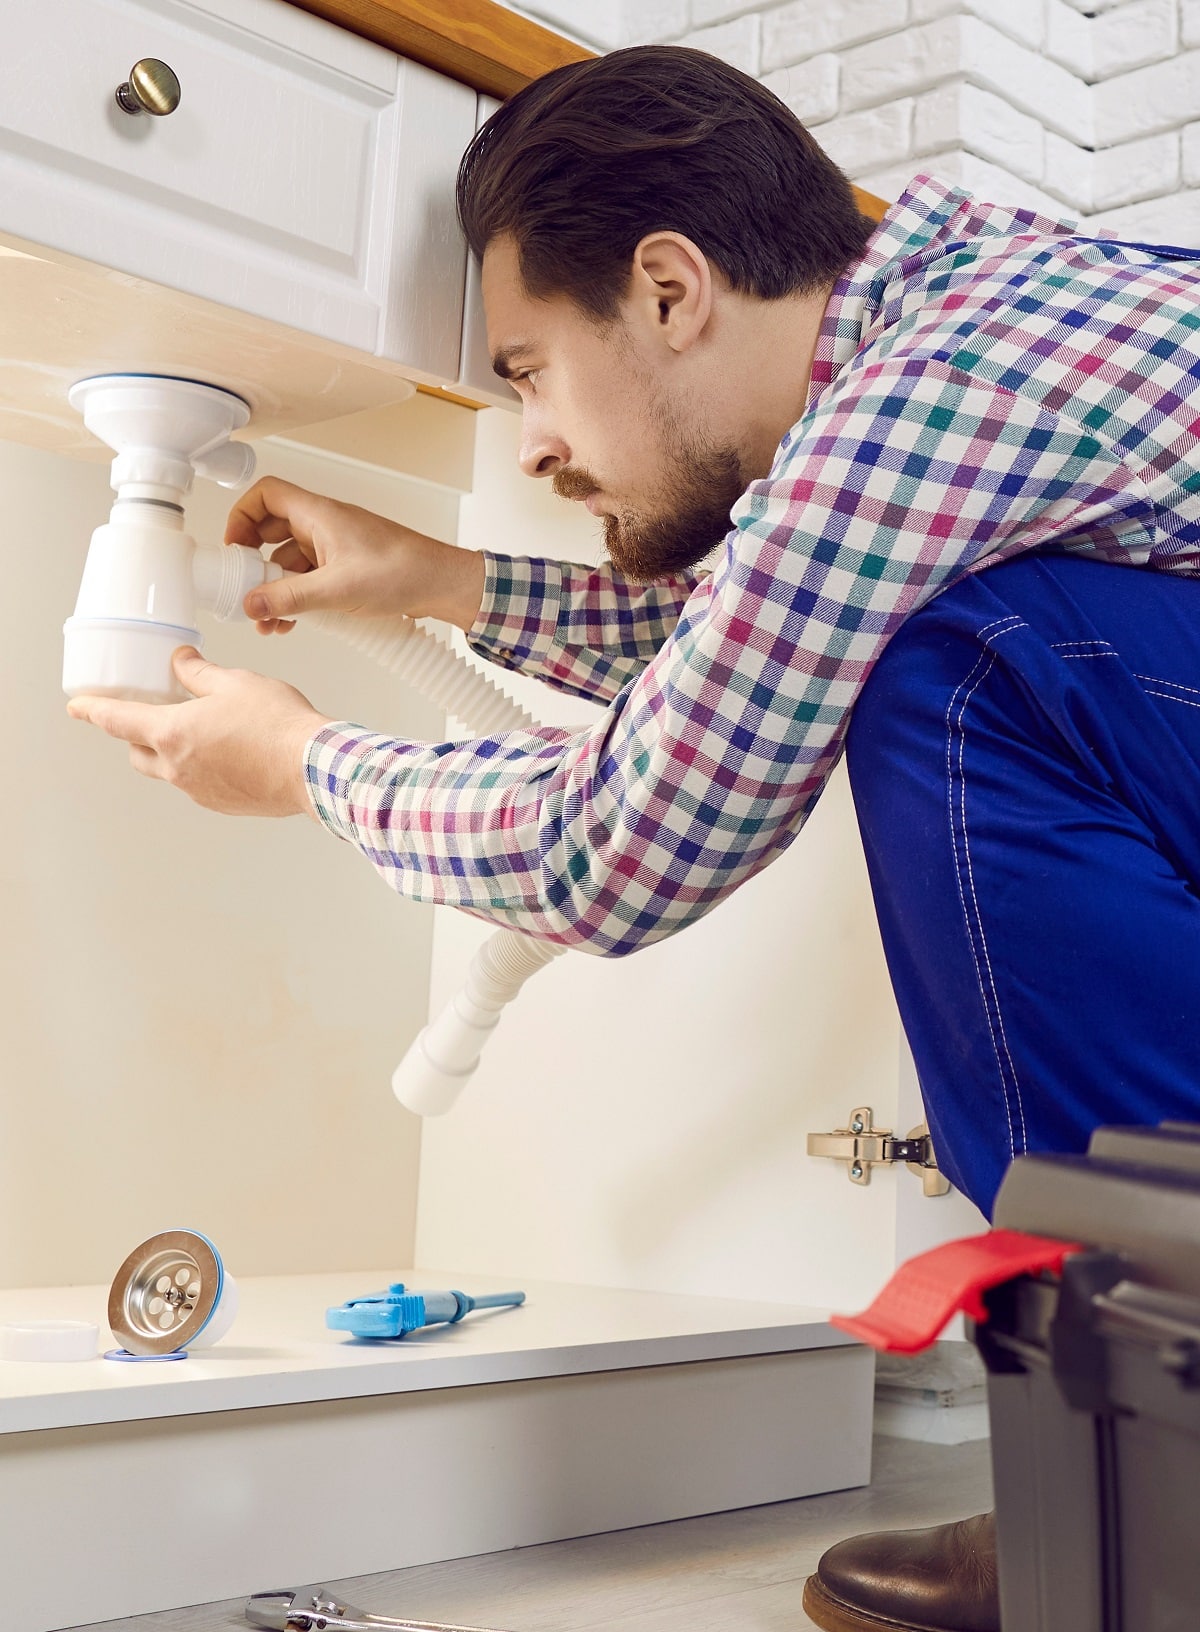 plumber fixing some problems with the kitchen sink, repairing pipes or unclogging the blockage